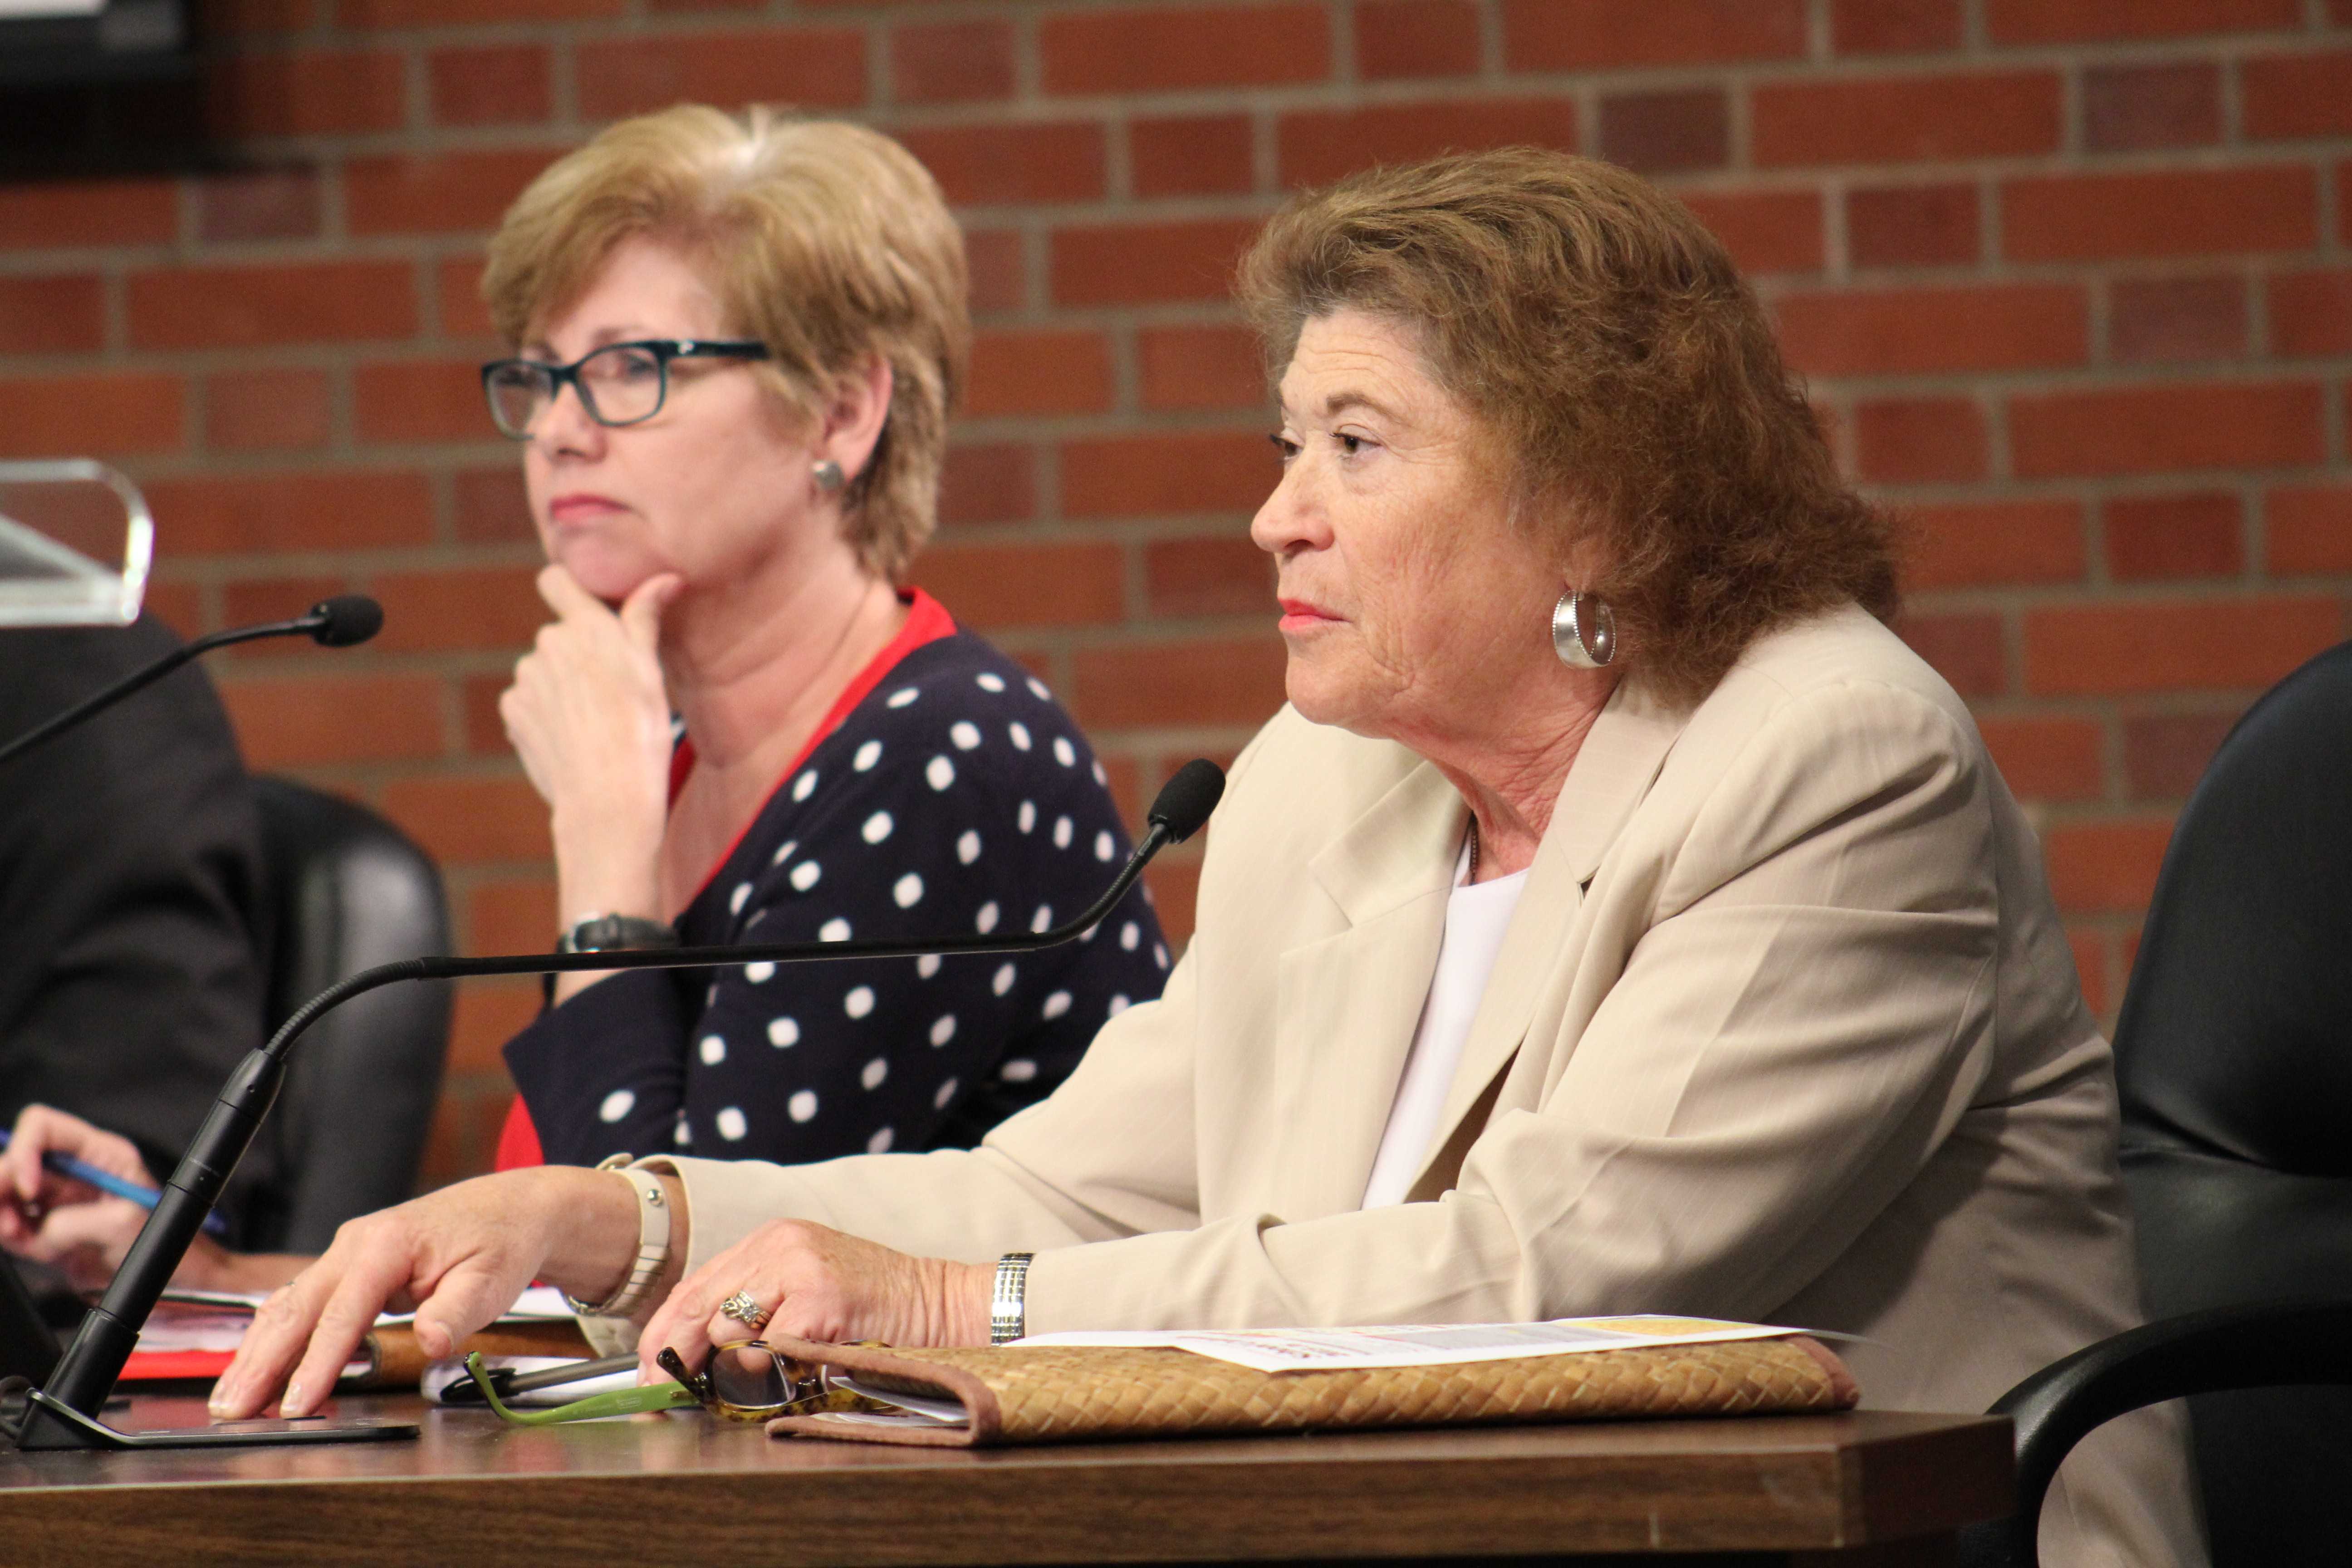 Board member Linda Duncan asks JCTA president Brent McKim why the TELL data does not desegregate high and low priority schools. The presentation received further criticism from the board about its lack of comparison data. Photo Kate Hater